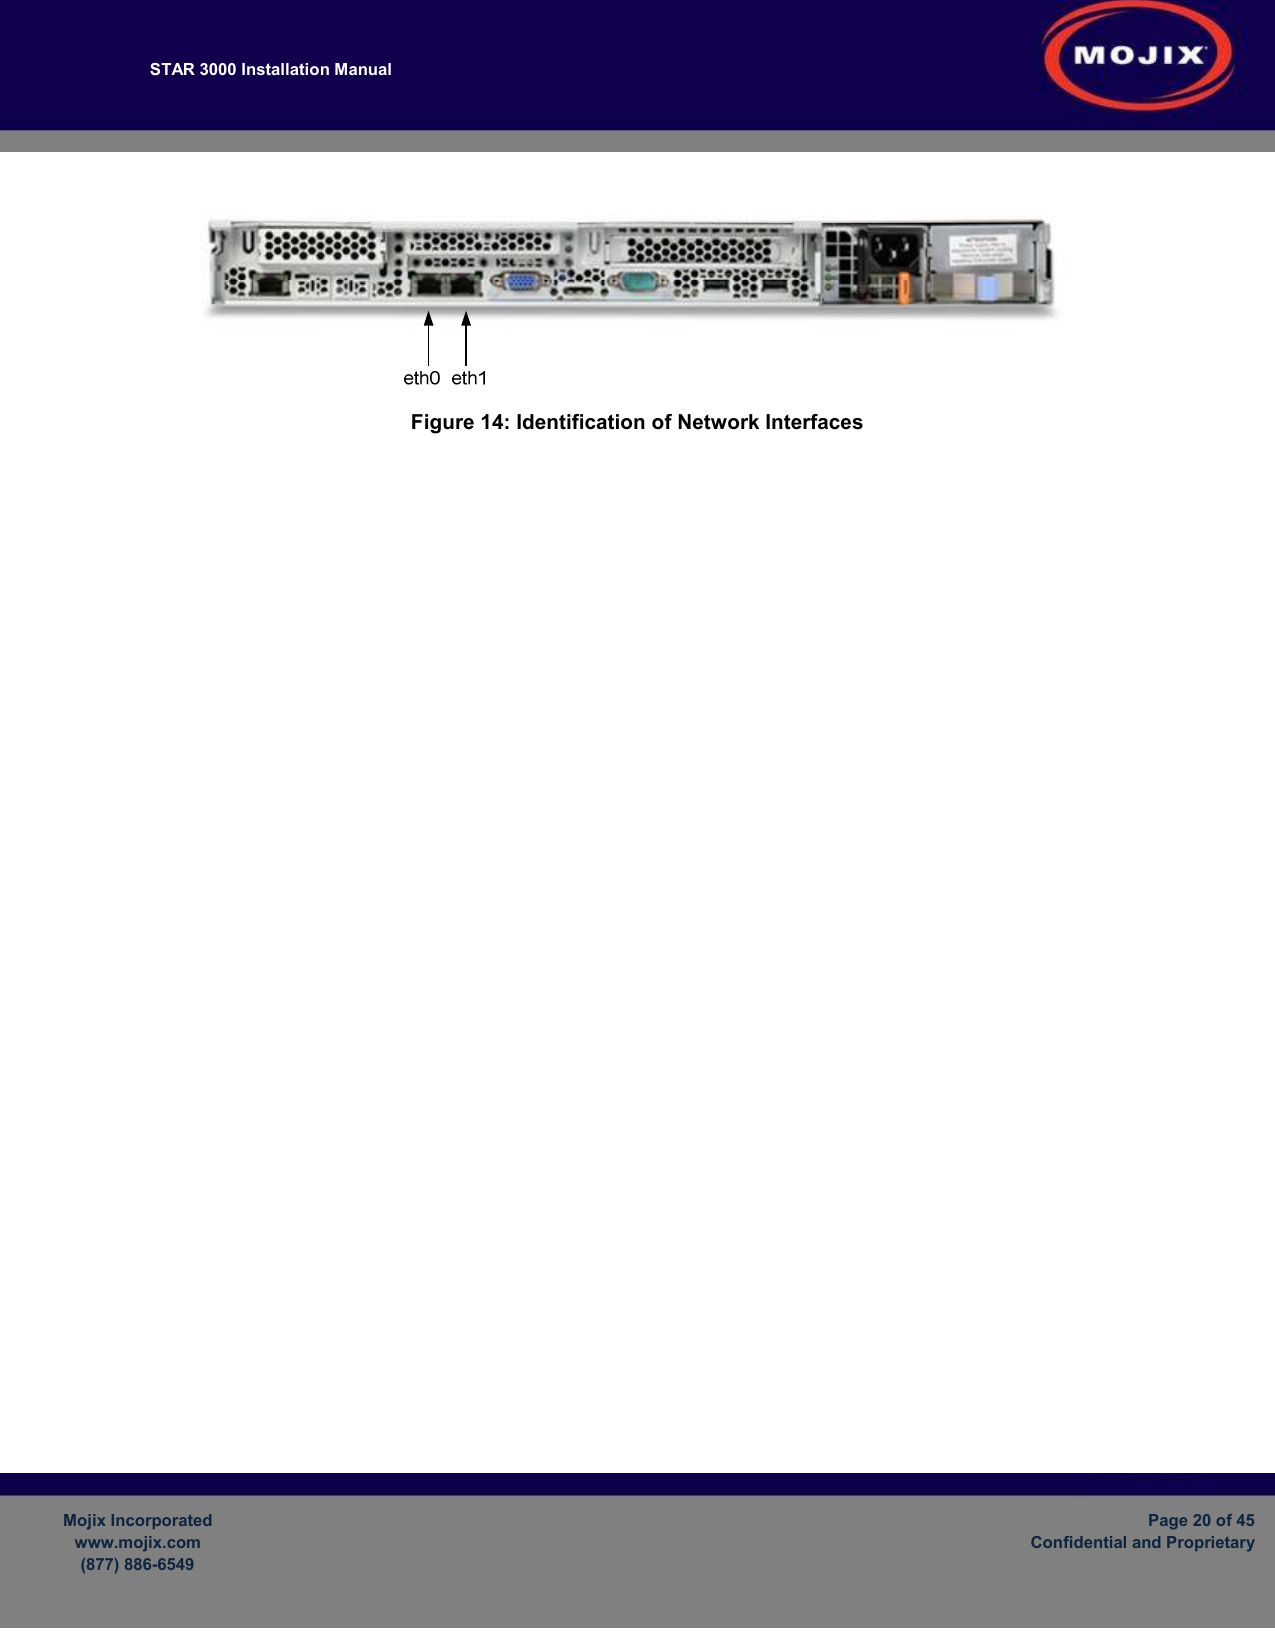 STAR 3000 Installation Manual         Mojix Incorporated www.mojix.com (877) 886-6549  Page 20 of 45 Confidential and Proprietary   Figure 14: Identification of Network Interfaces 